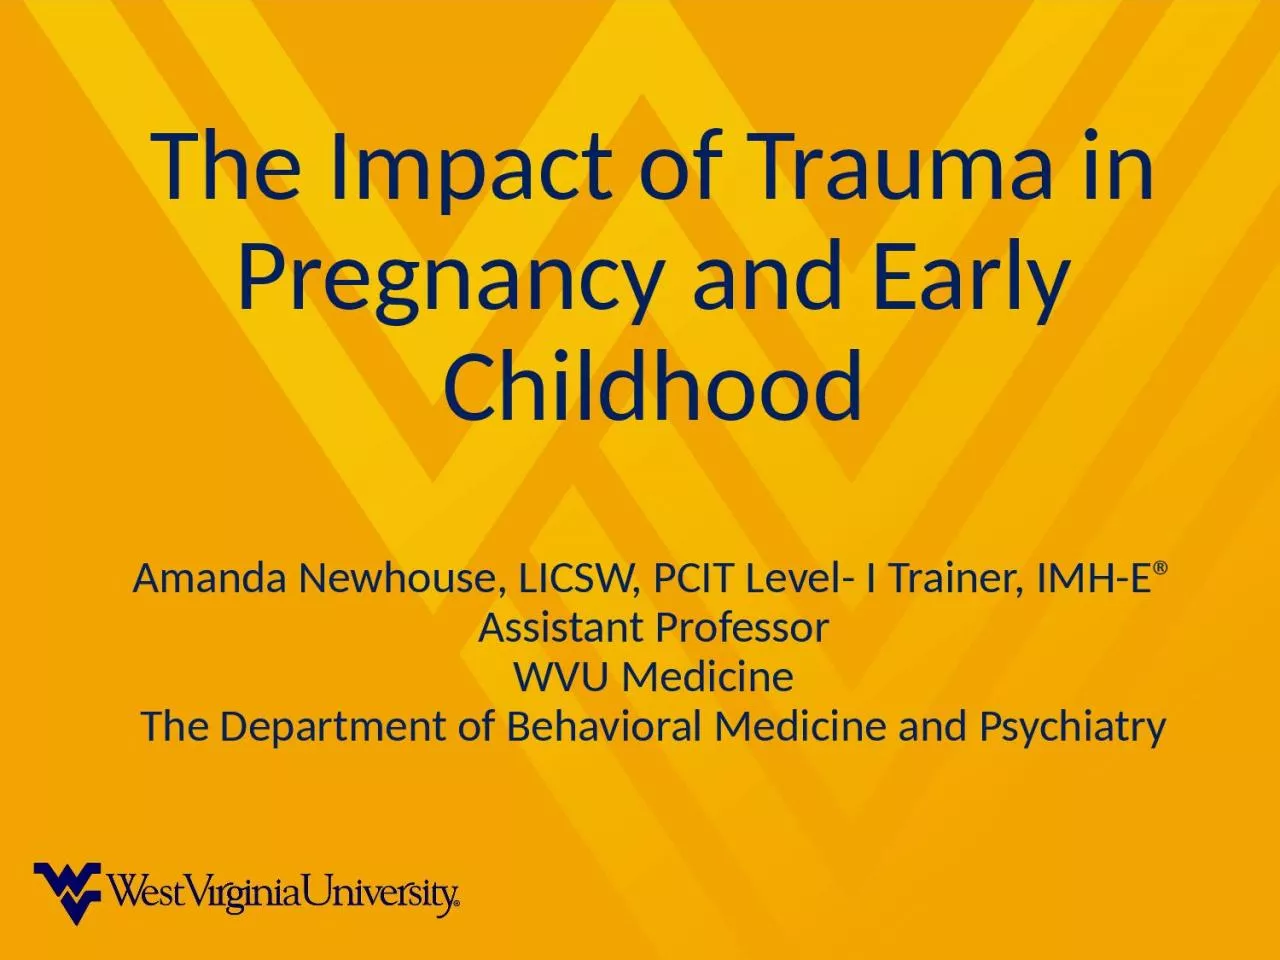 The Impact of Trauma in Pregnancy and Early Childhood